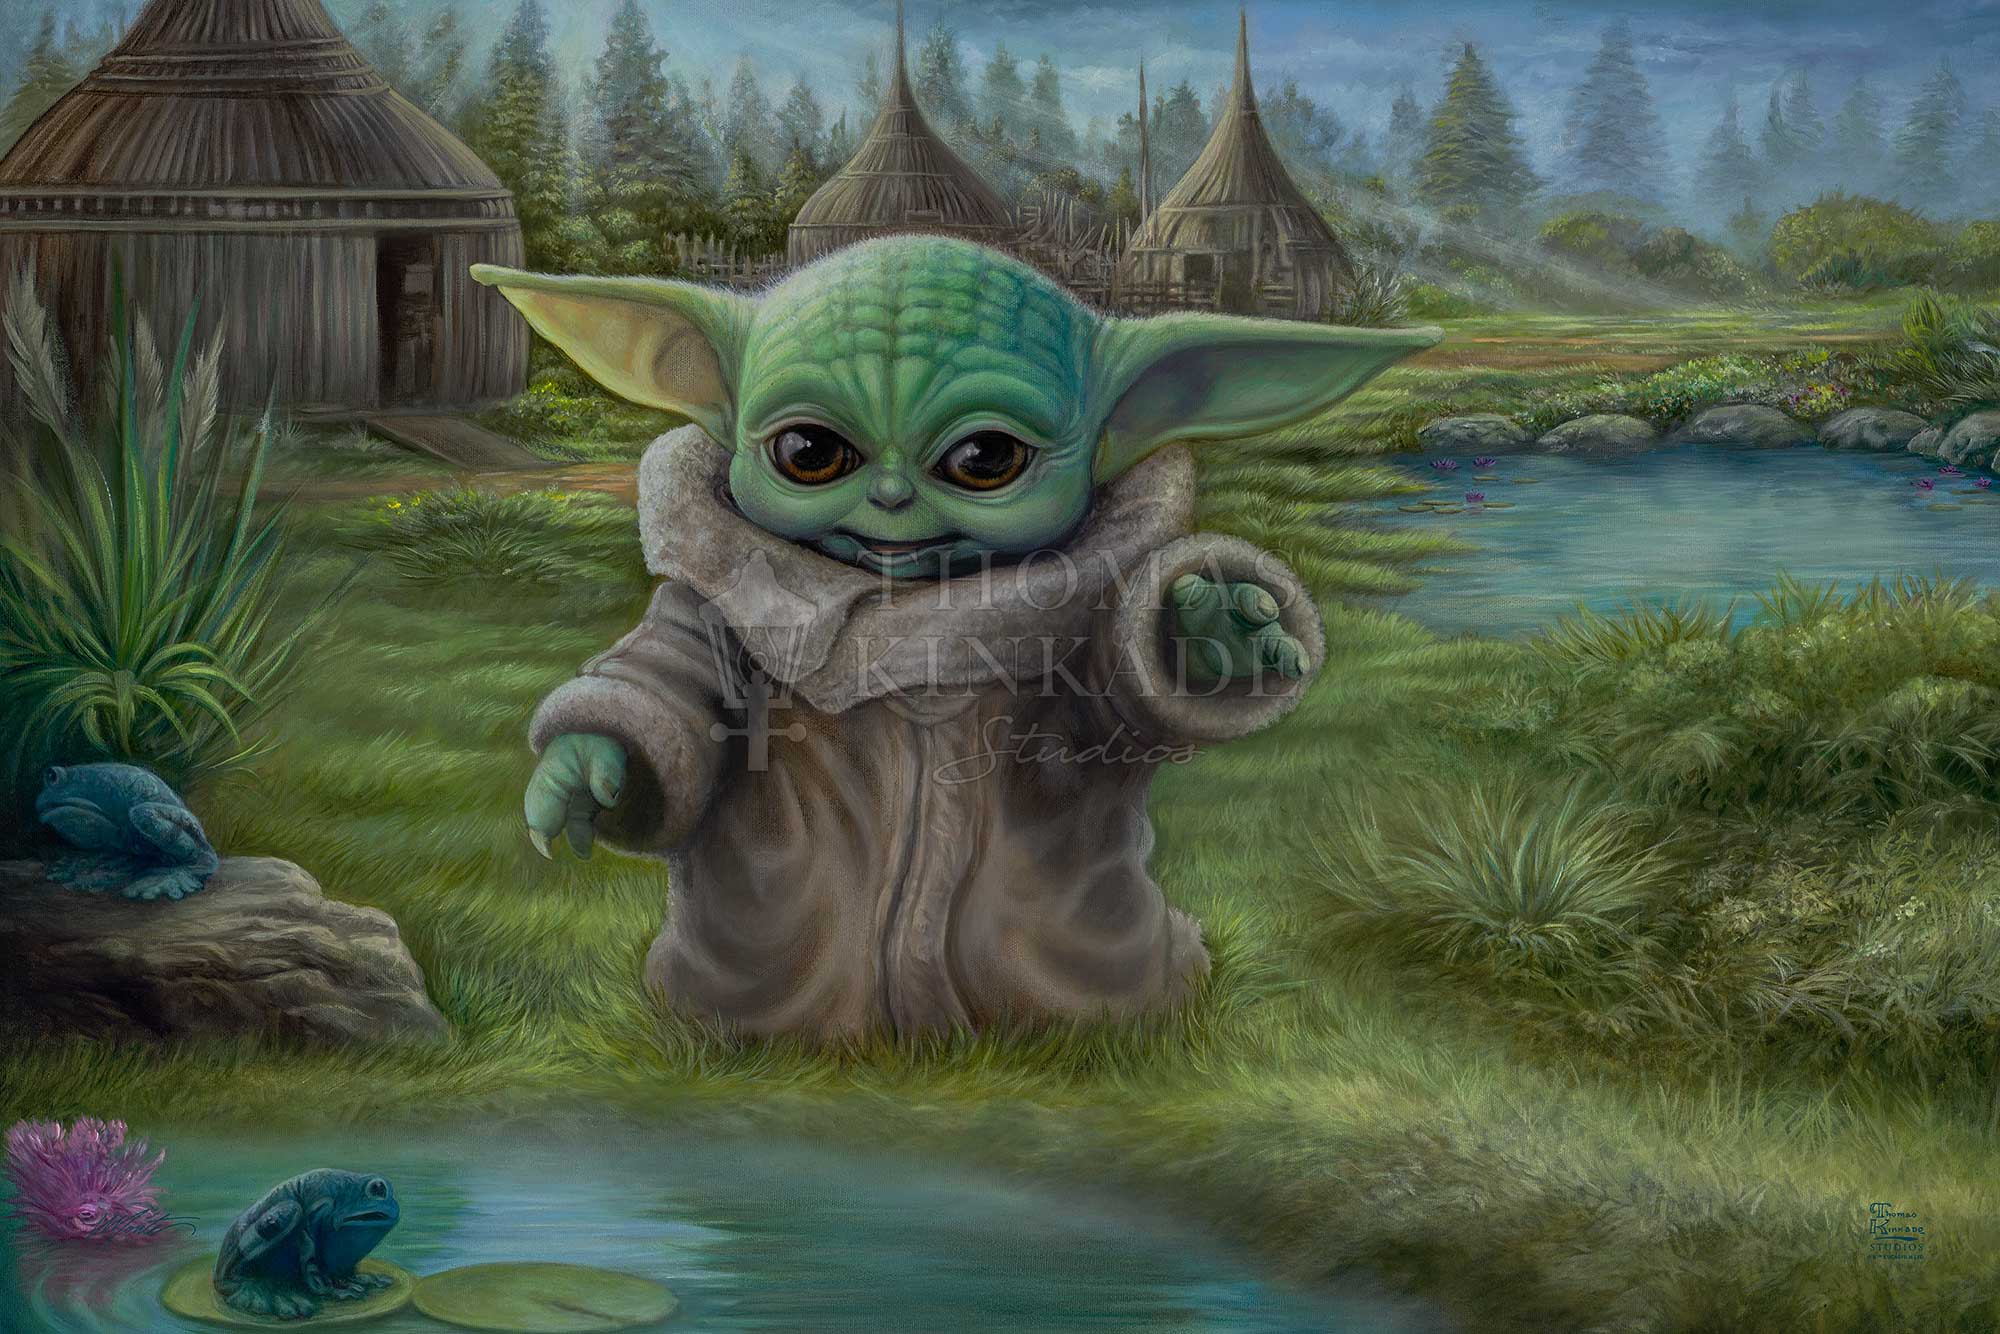 The Child plays by a pond. Inspired by Star Wars Movies Series The Mandalorian. 